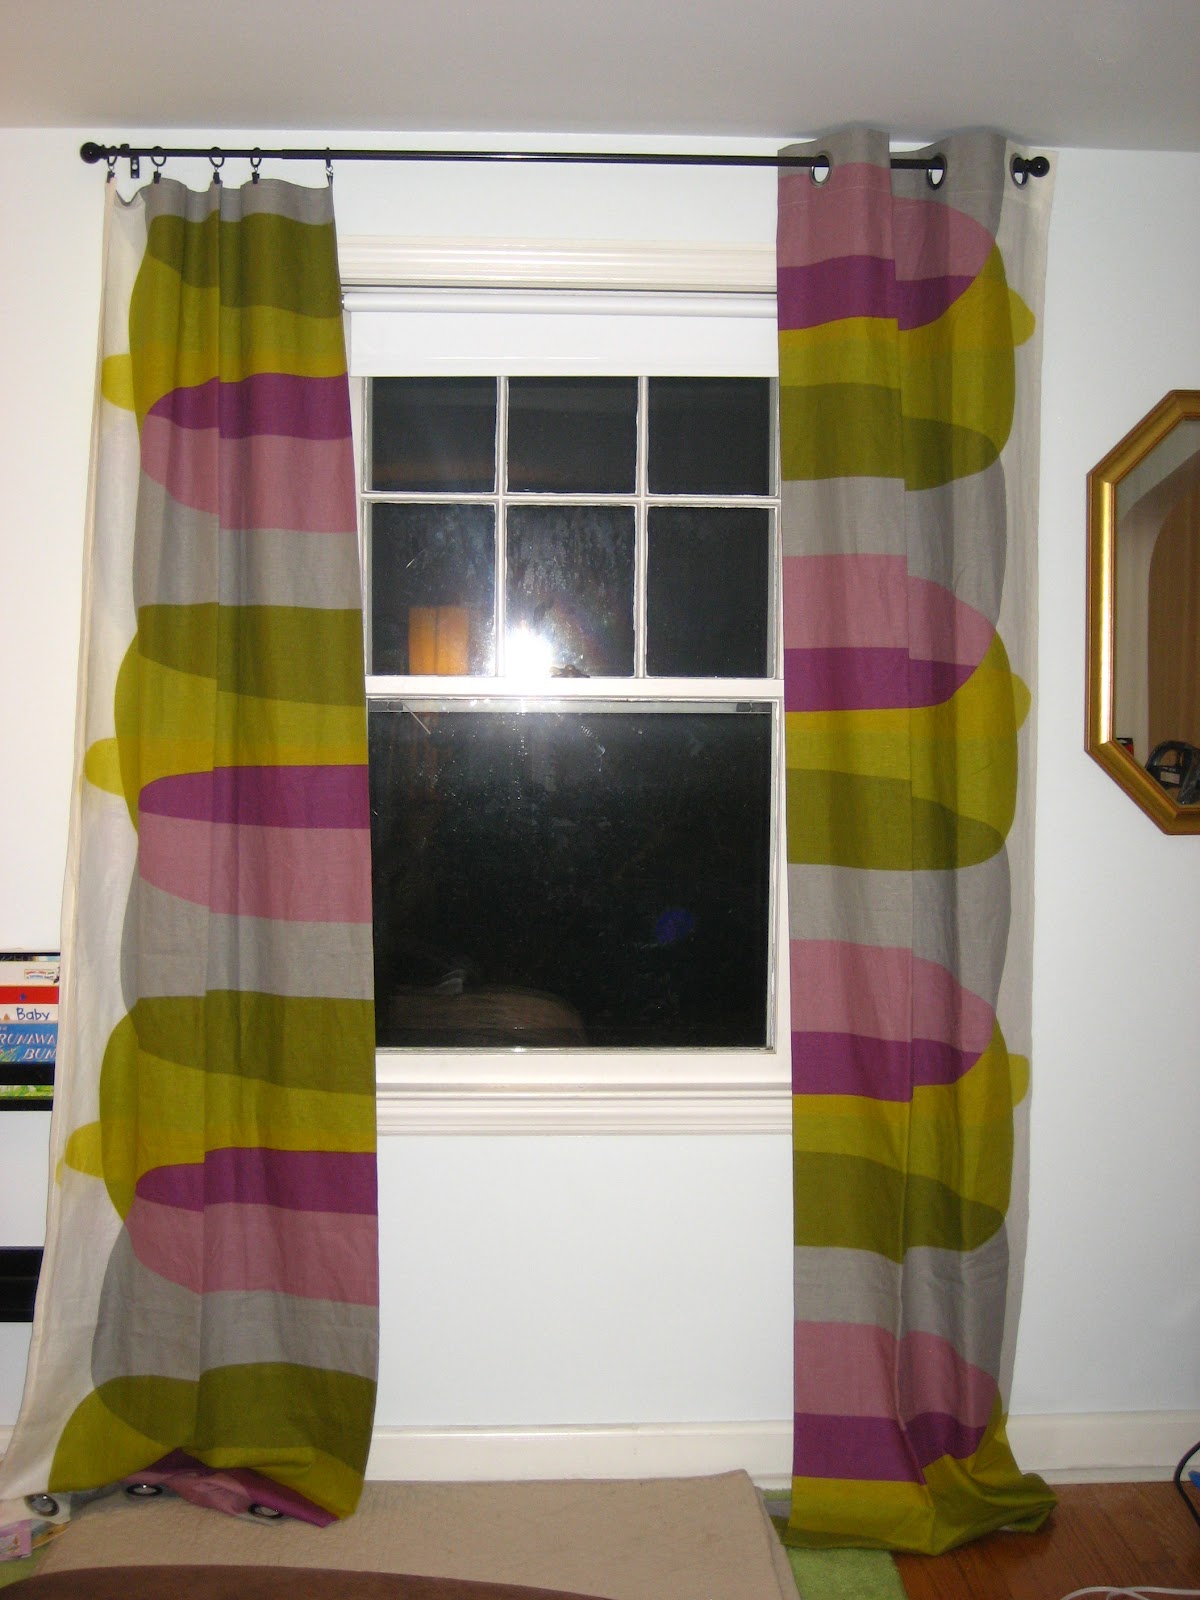 29 Rue House: Curtains in the House